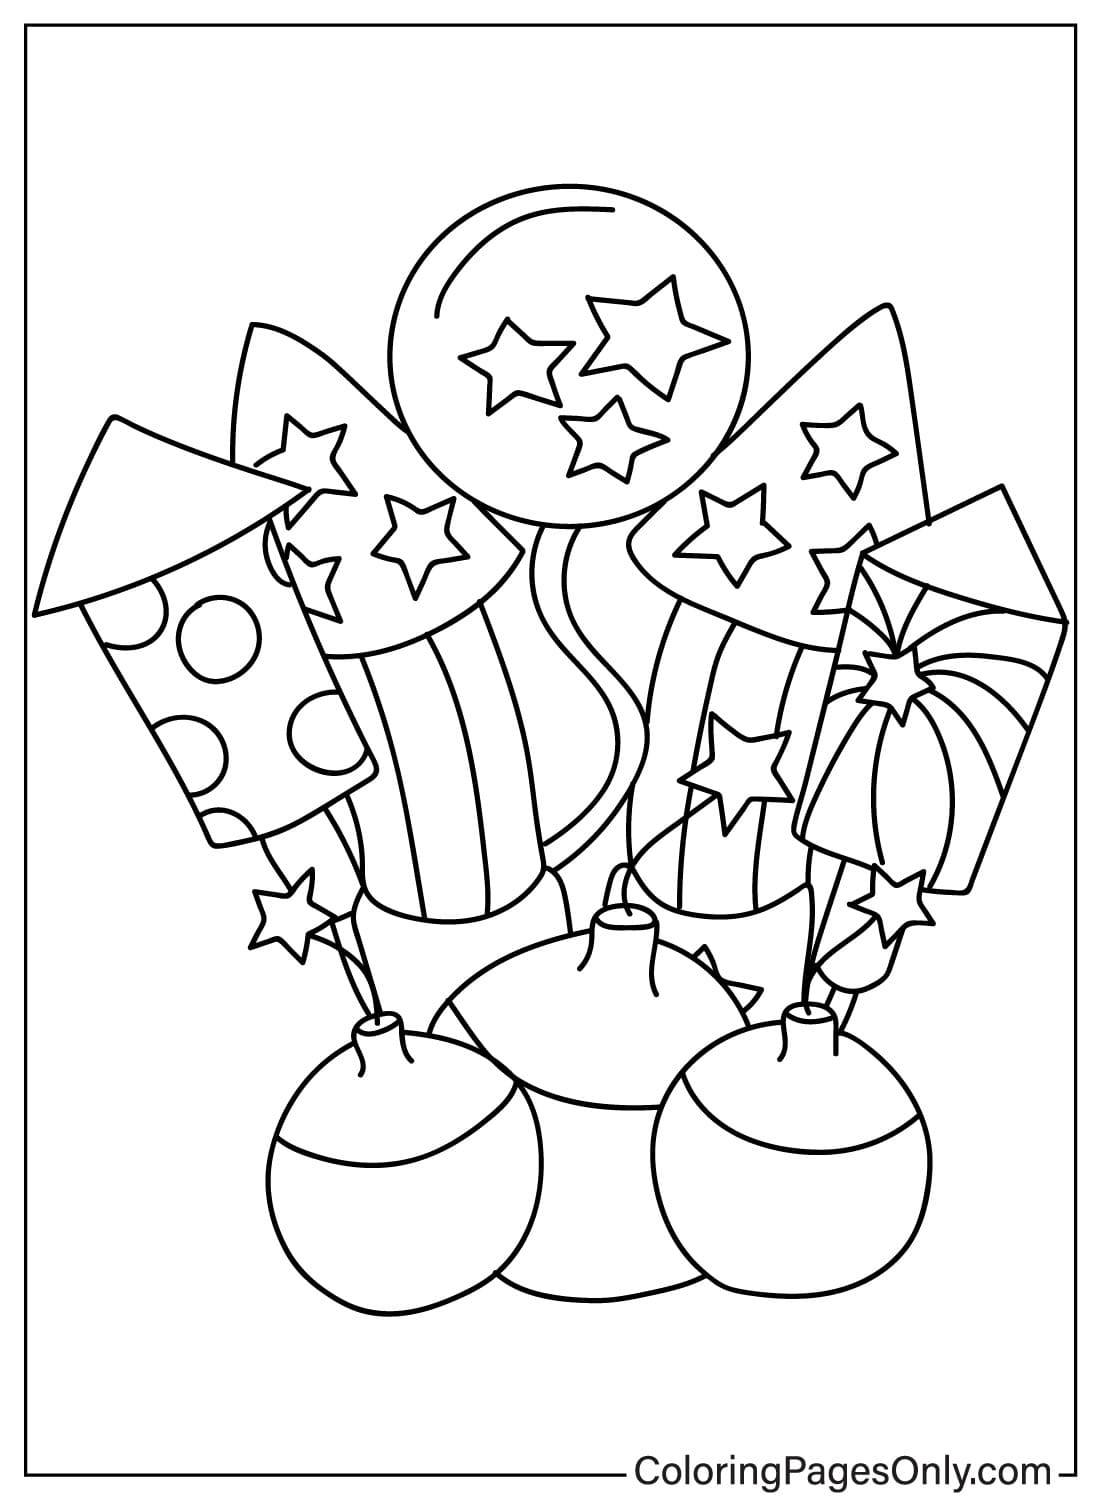 19 Free Printable Fireworks Coloring Pages